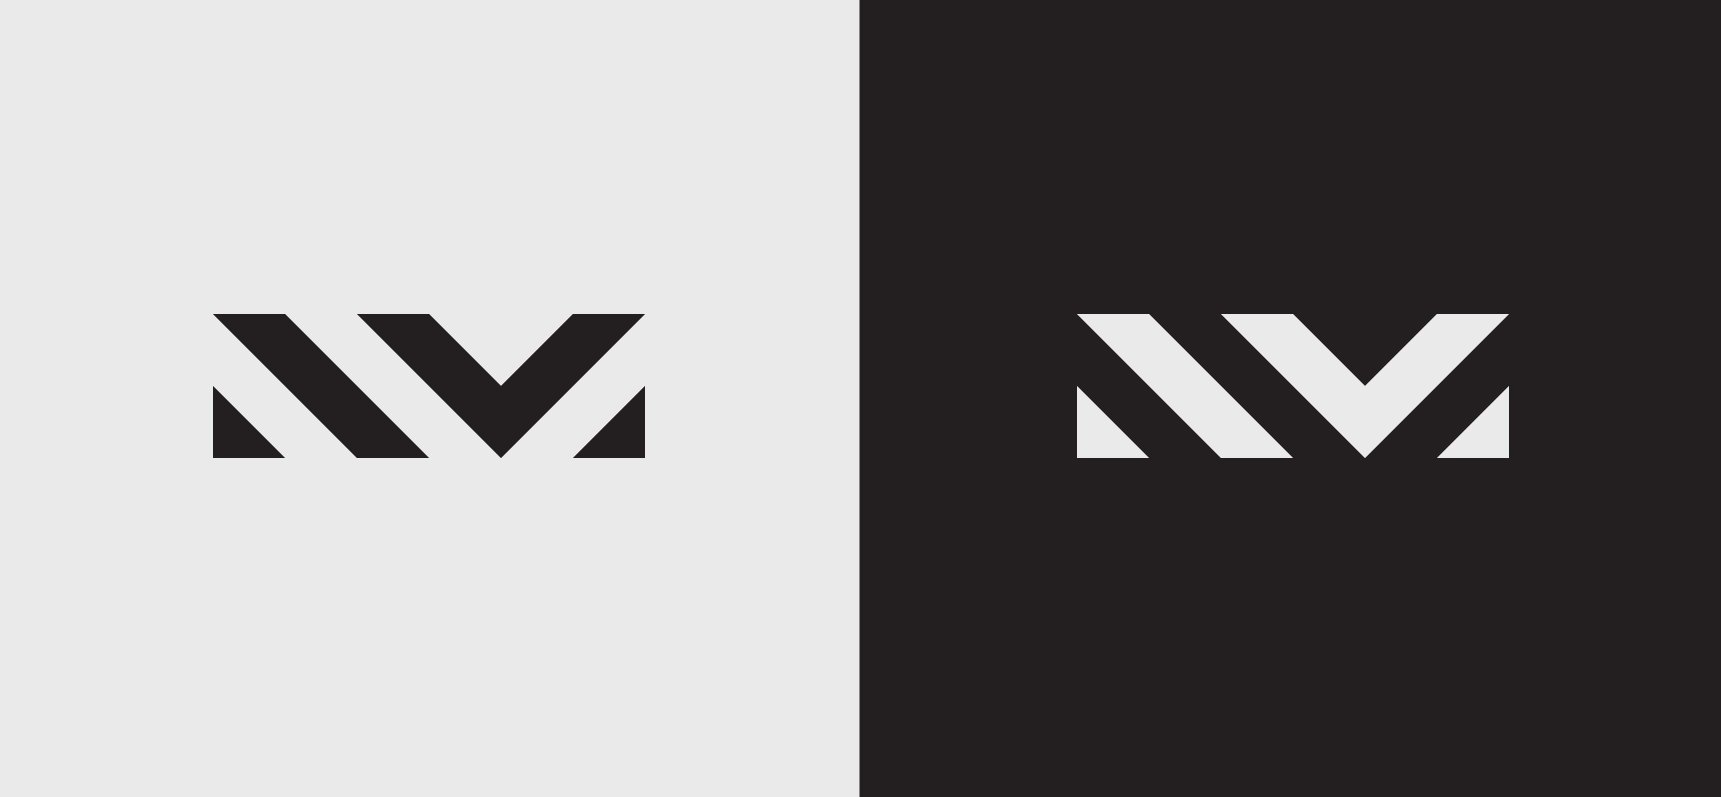 NM Logo - Personal Logo NM, what are your thoughts?